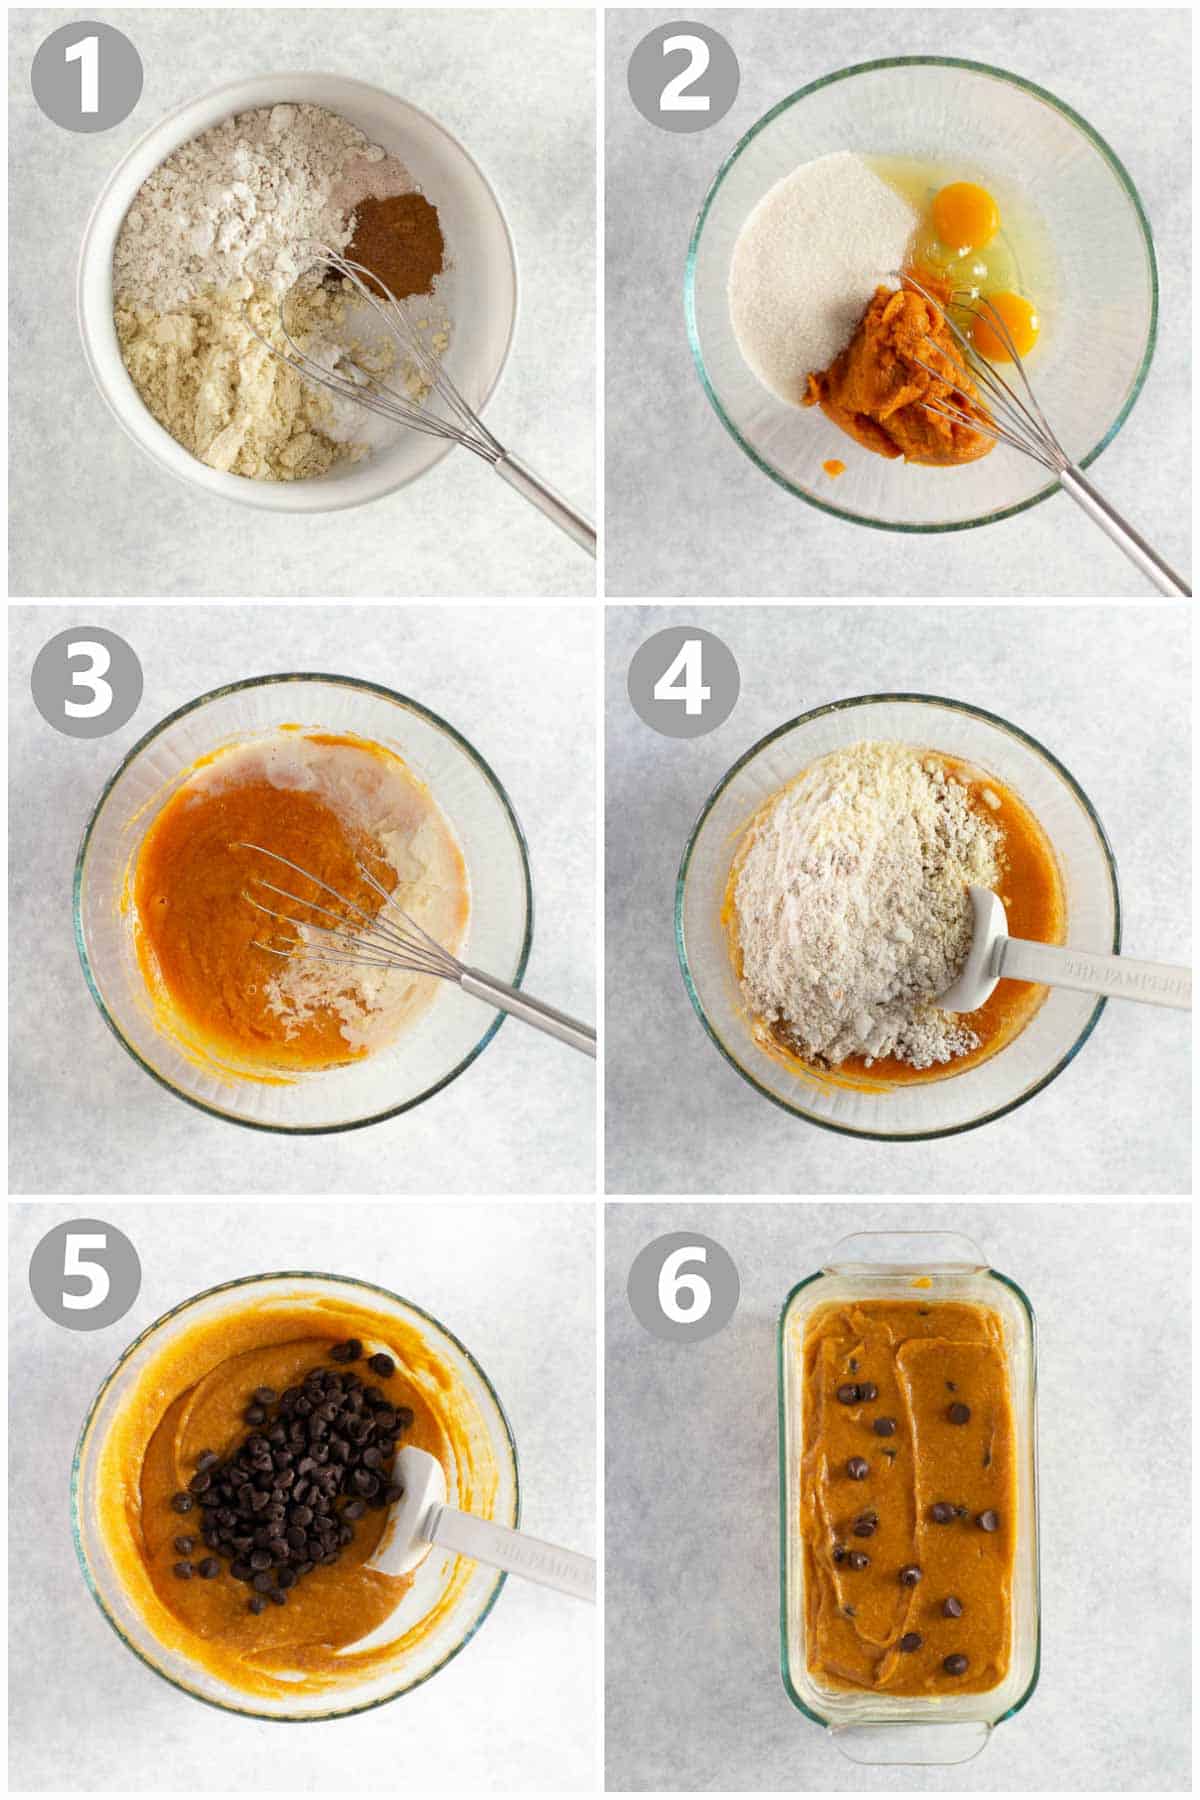 step-by-step instructions on how to make gluten-free pumpkin bread